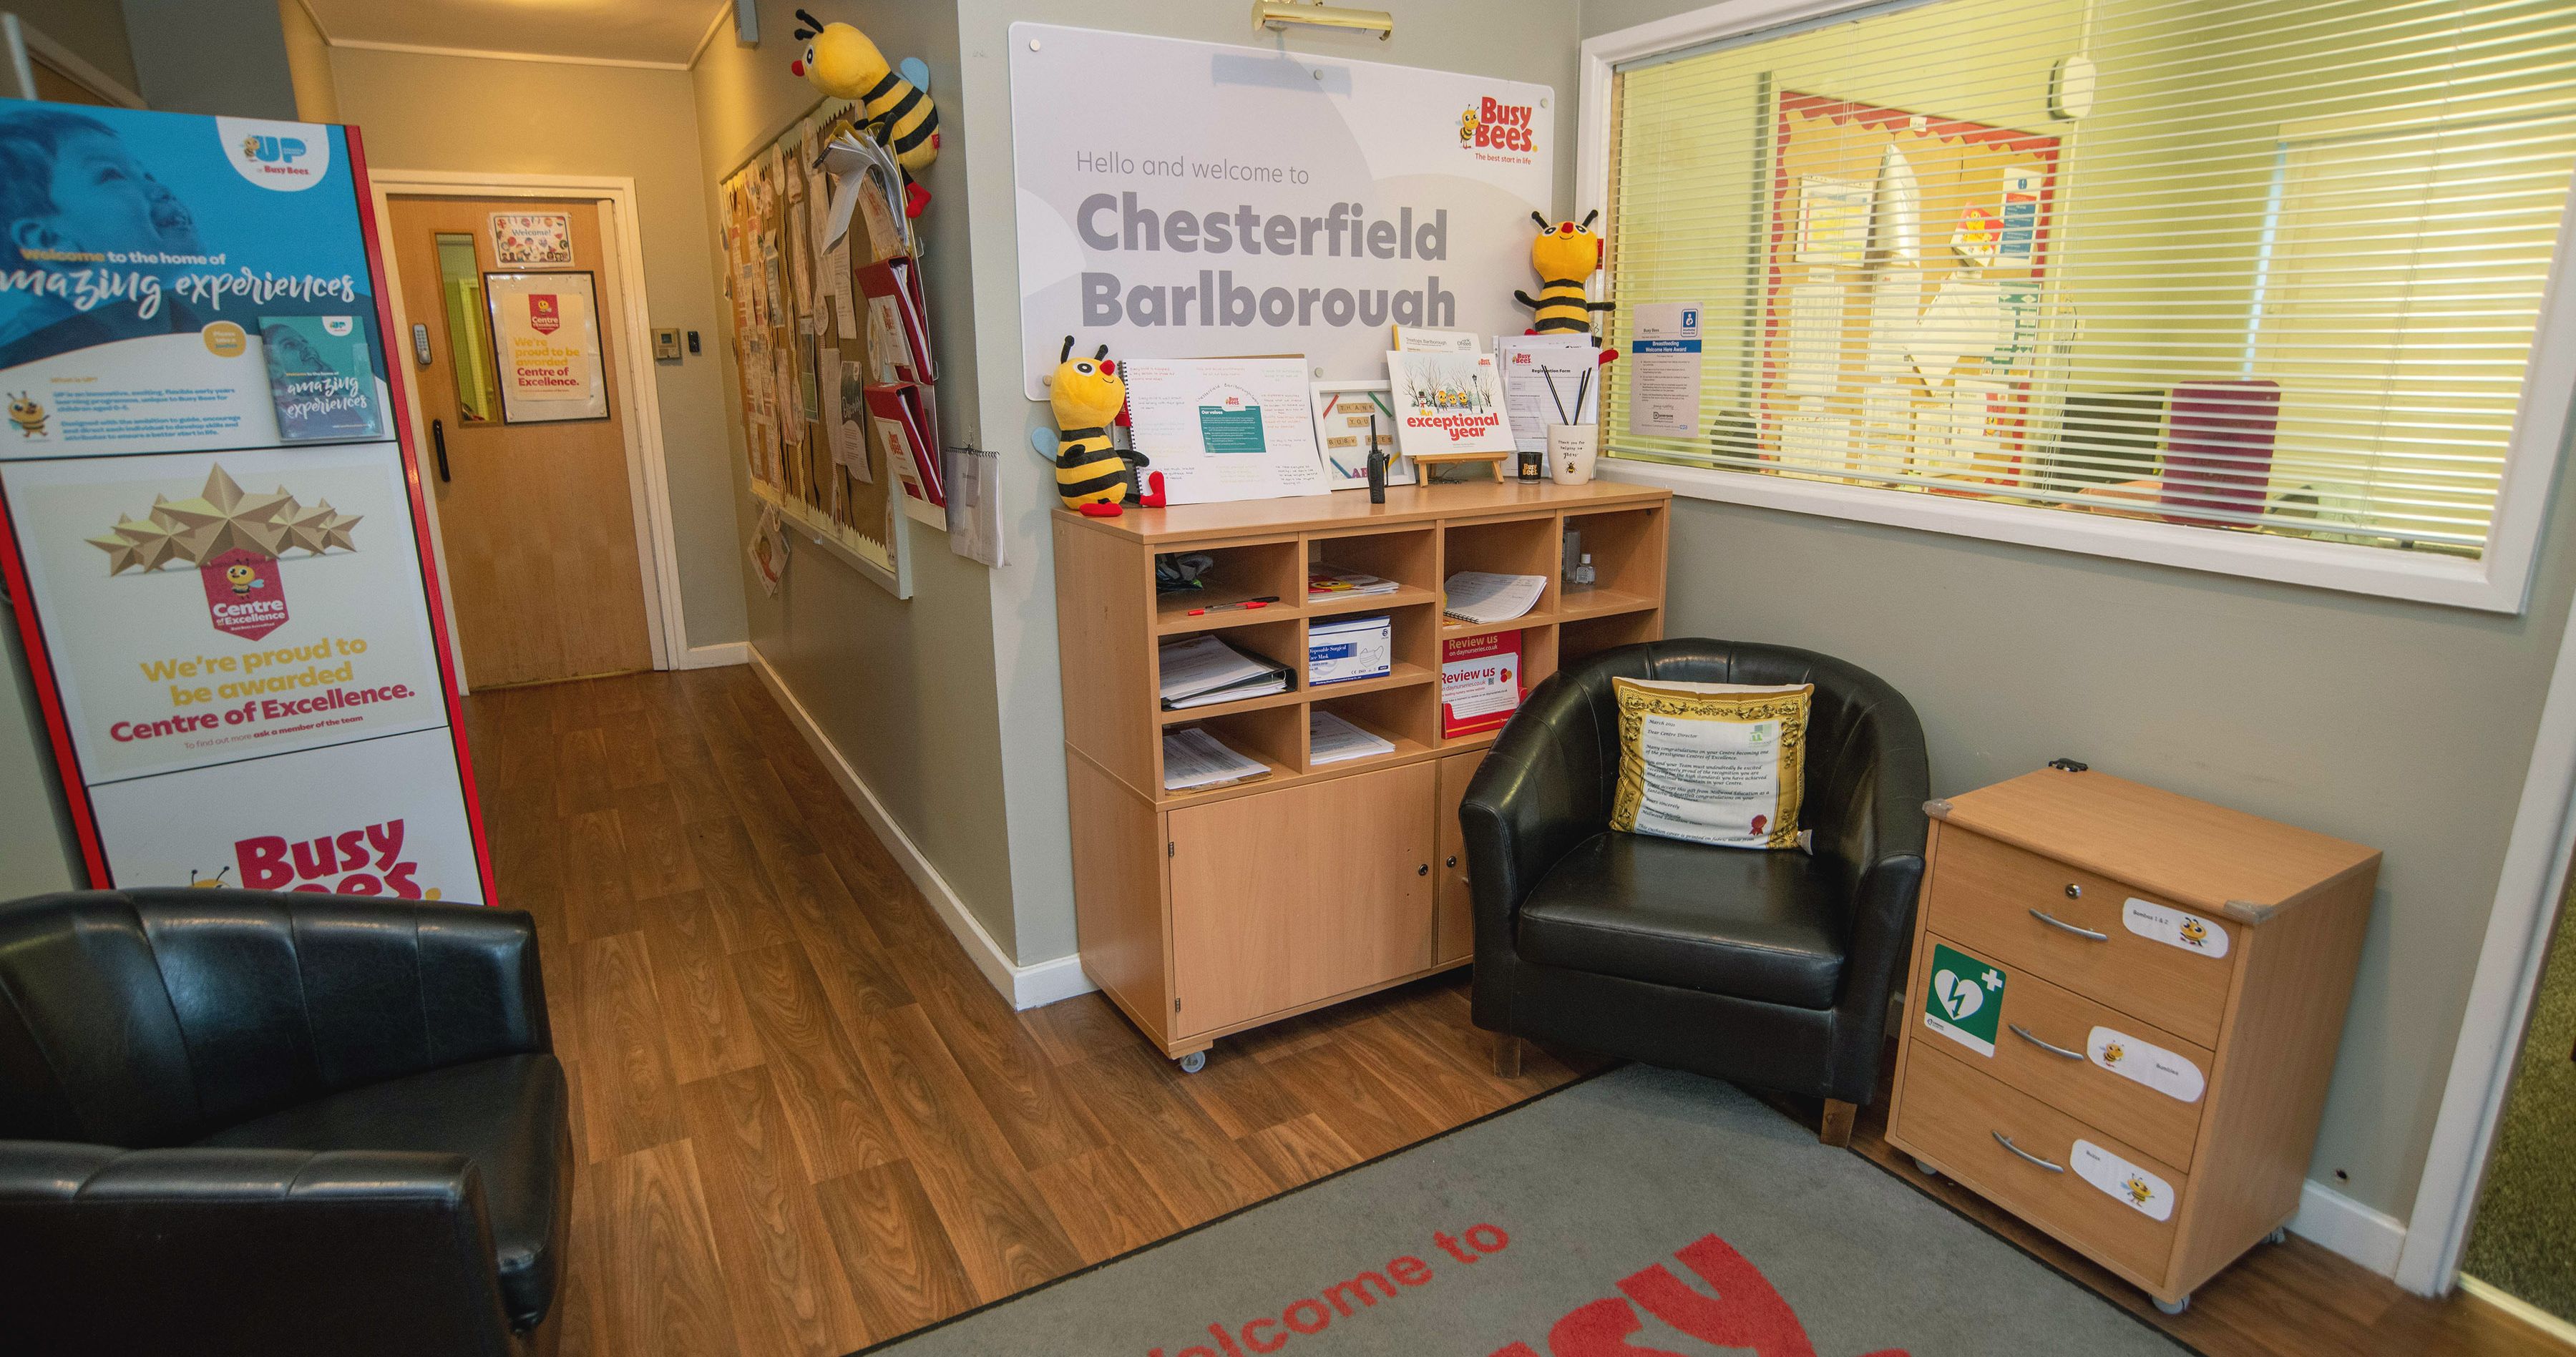 Images Busy Bees at Chesterfield Barlborough